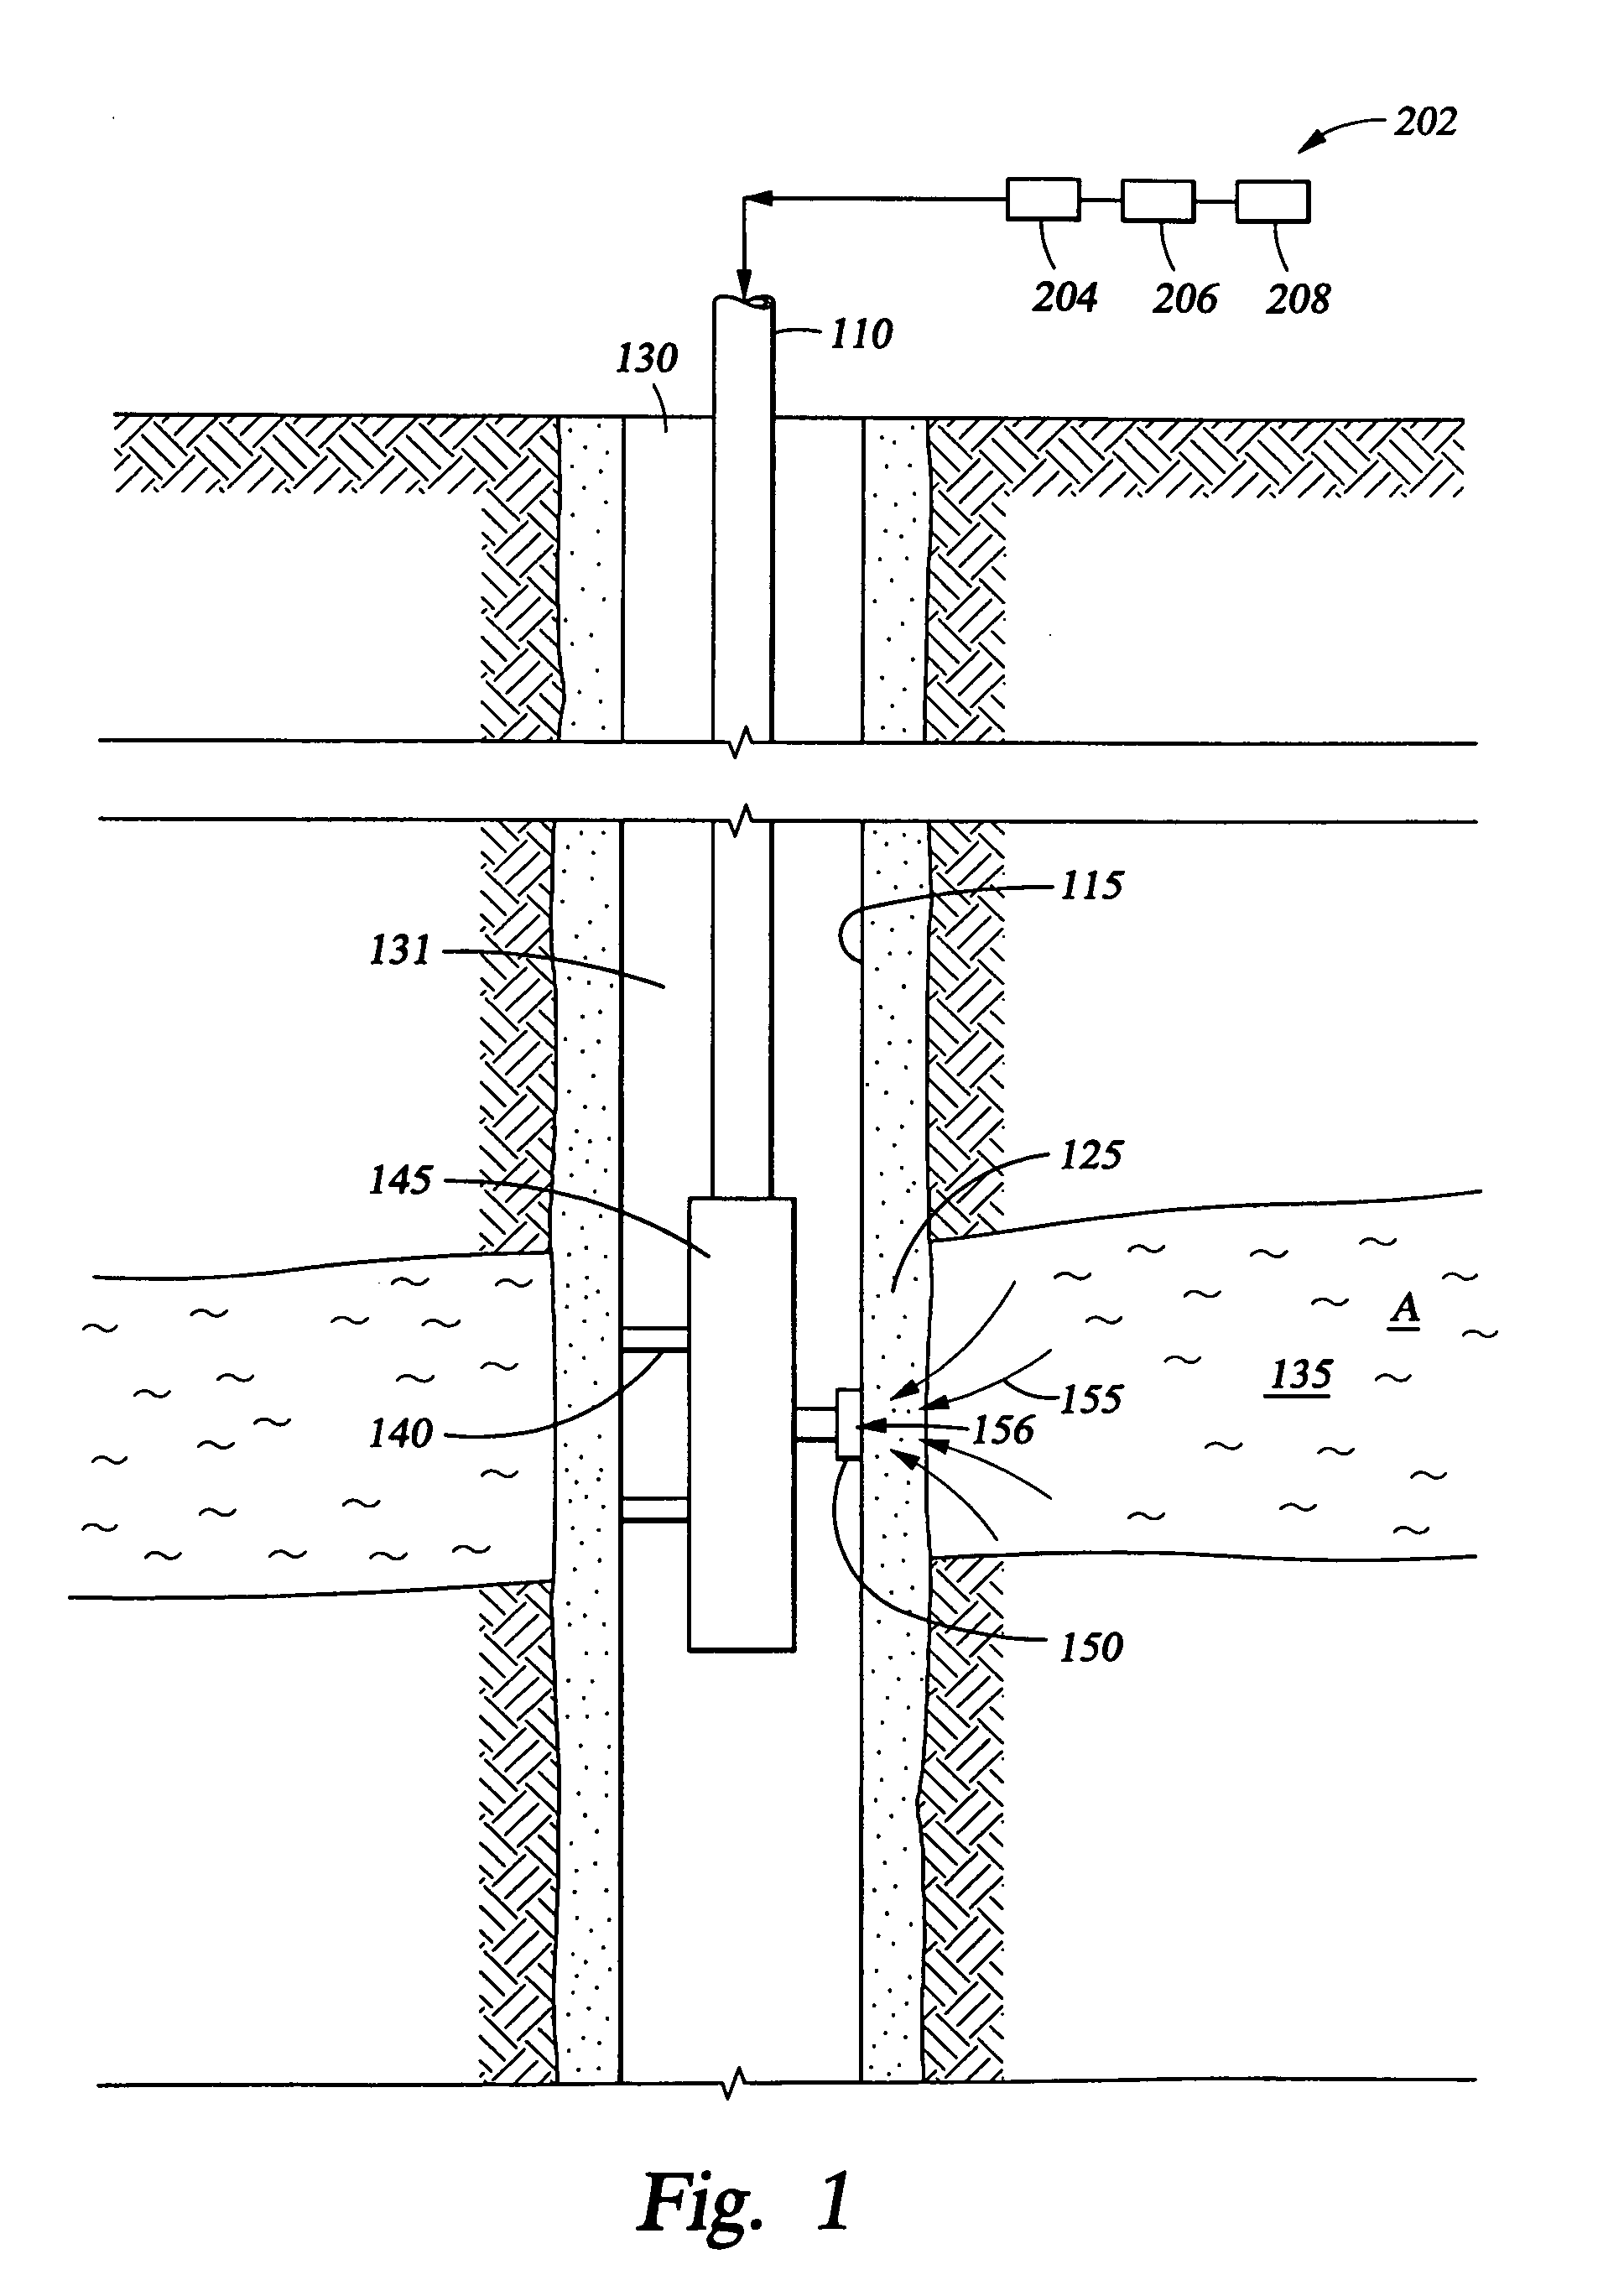 Method and apparatus for collecting fluid samples downhole